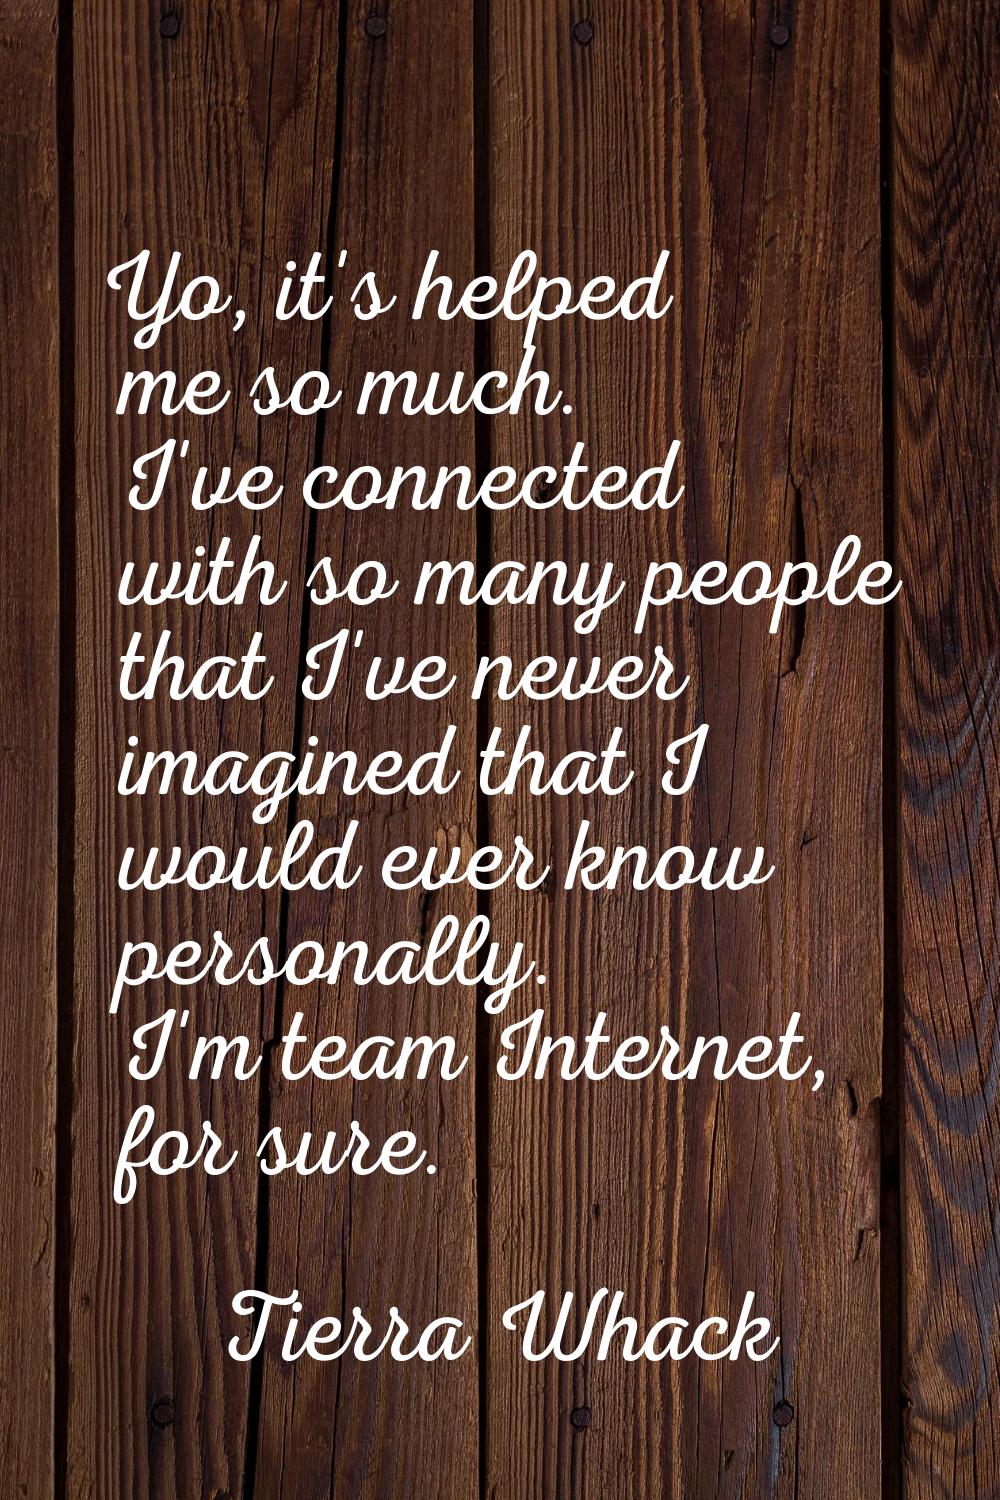 Yo, it's helped me so much. I've connected with so many people that I've never imagined that I woul